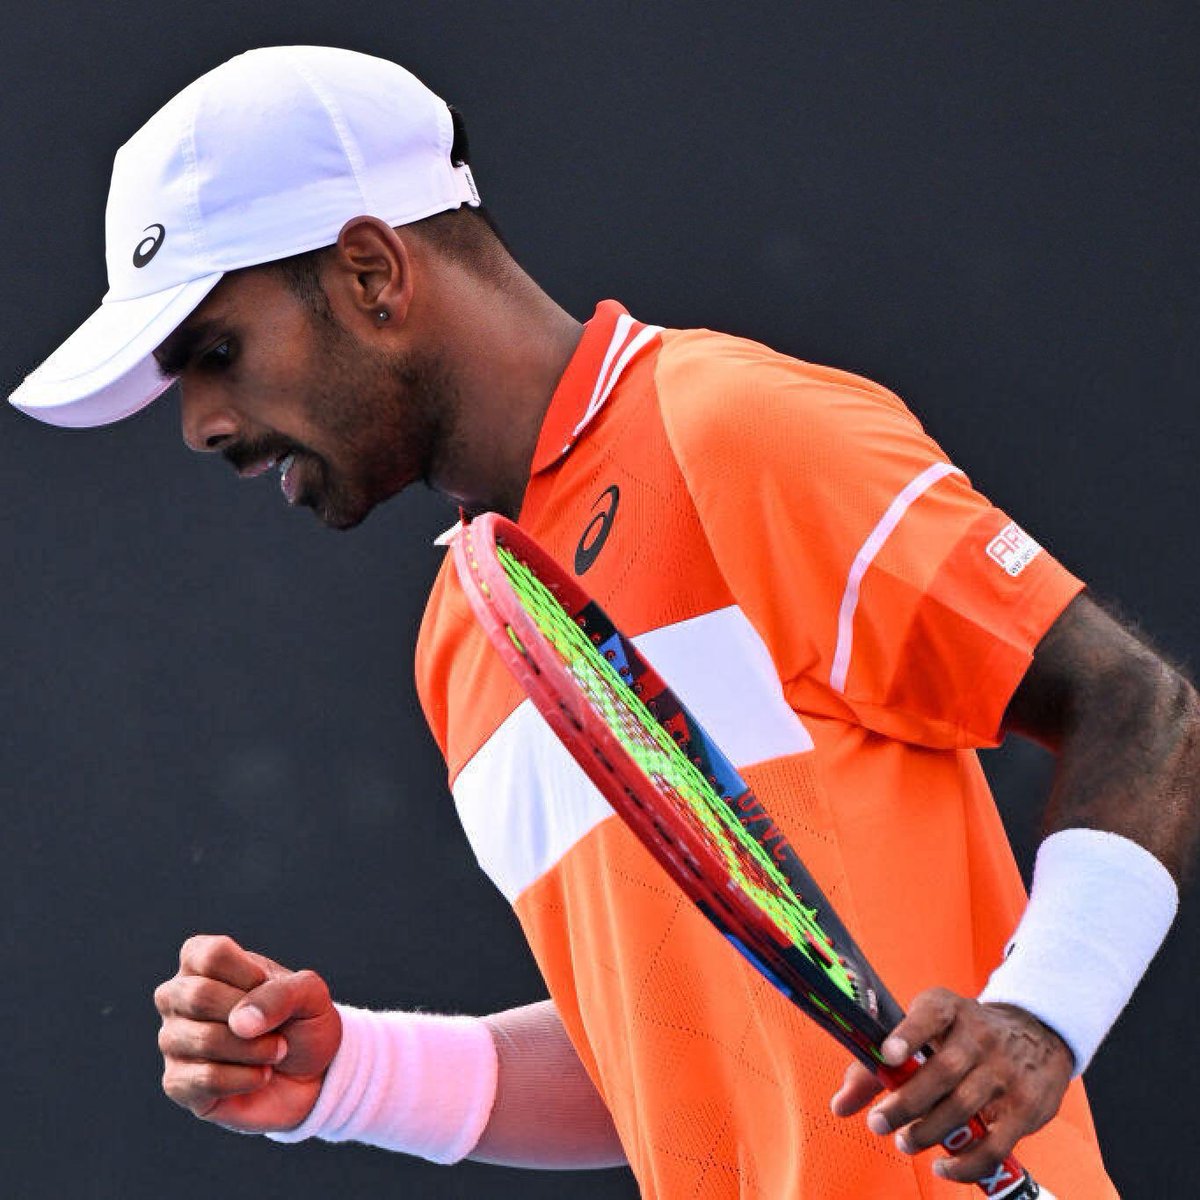 Sumit Nagal defeated WR27 Alex Bublik in Australian Open 1st Round 6-4, 6-2, 7-6 This is Nagal’s 2nd win in grand slam main draw HISTORIC #AusOpen #AO24